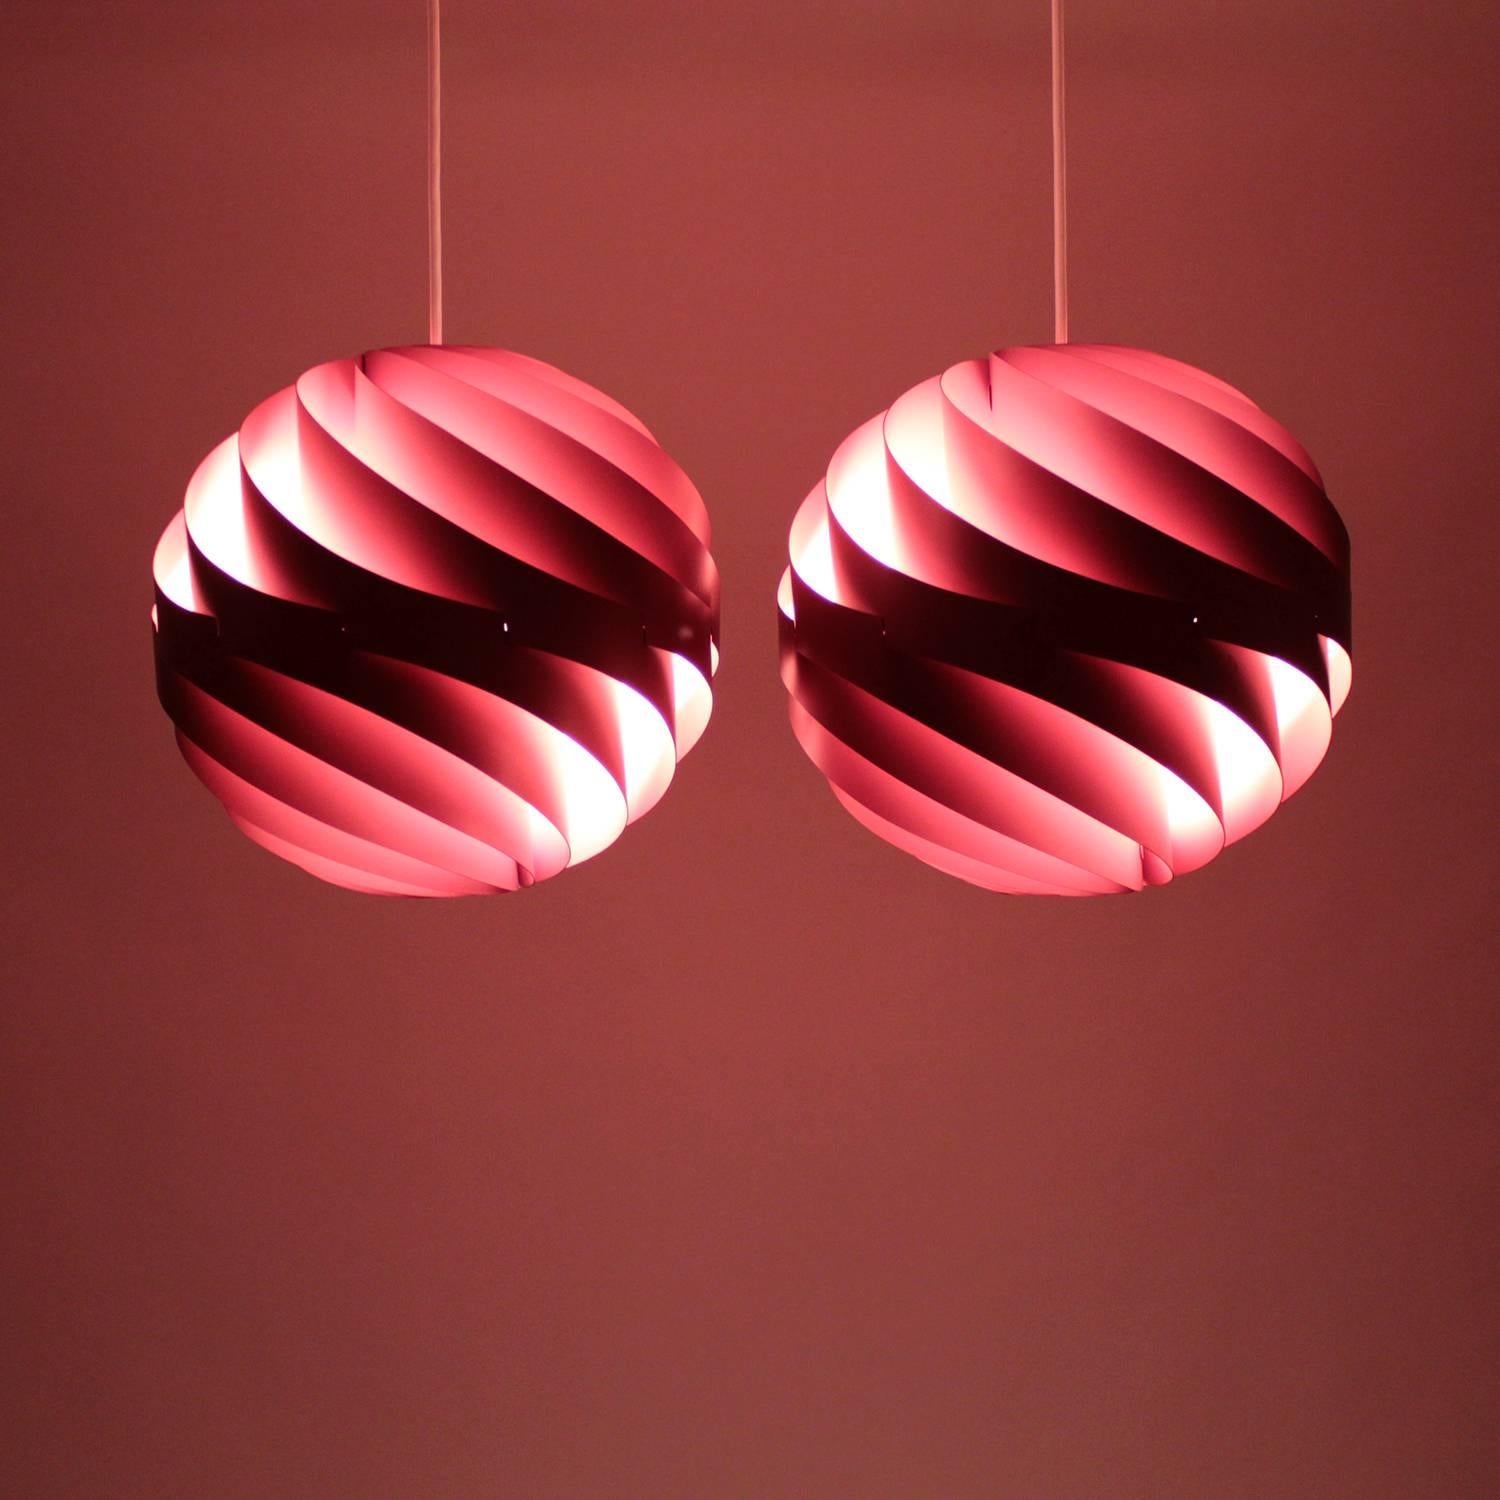 TURBO I - pair of pendants by Louis Weisdorf in 1965 and produced by Lyfa from 1967. Extremely rare vintage and super attractive pair of Danish Mid-Century design masterpieces! 

12 thin aluminum lamellae elegantly spiral twisted and intertwined